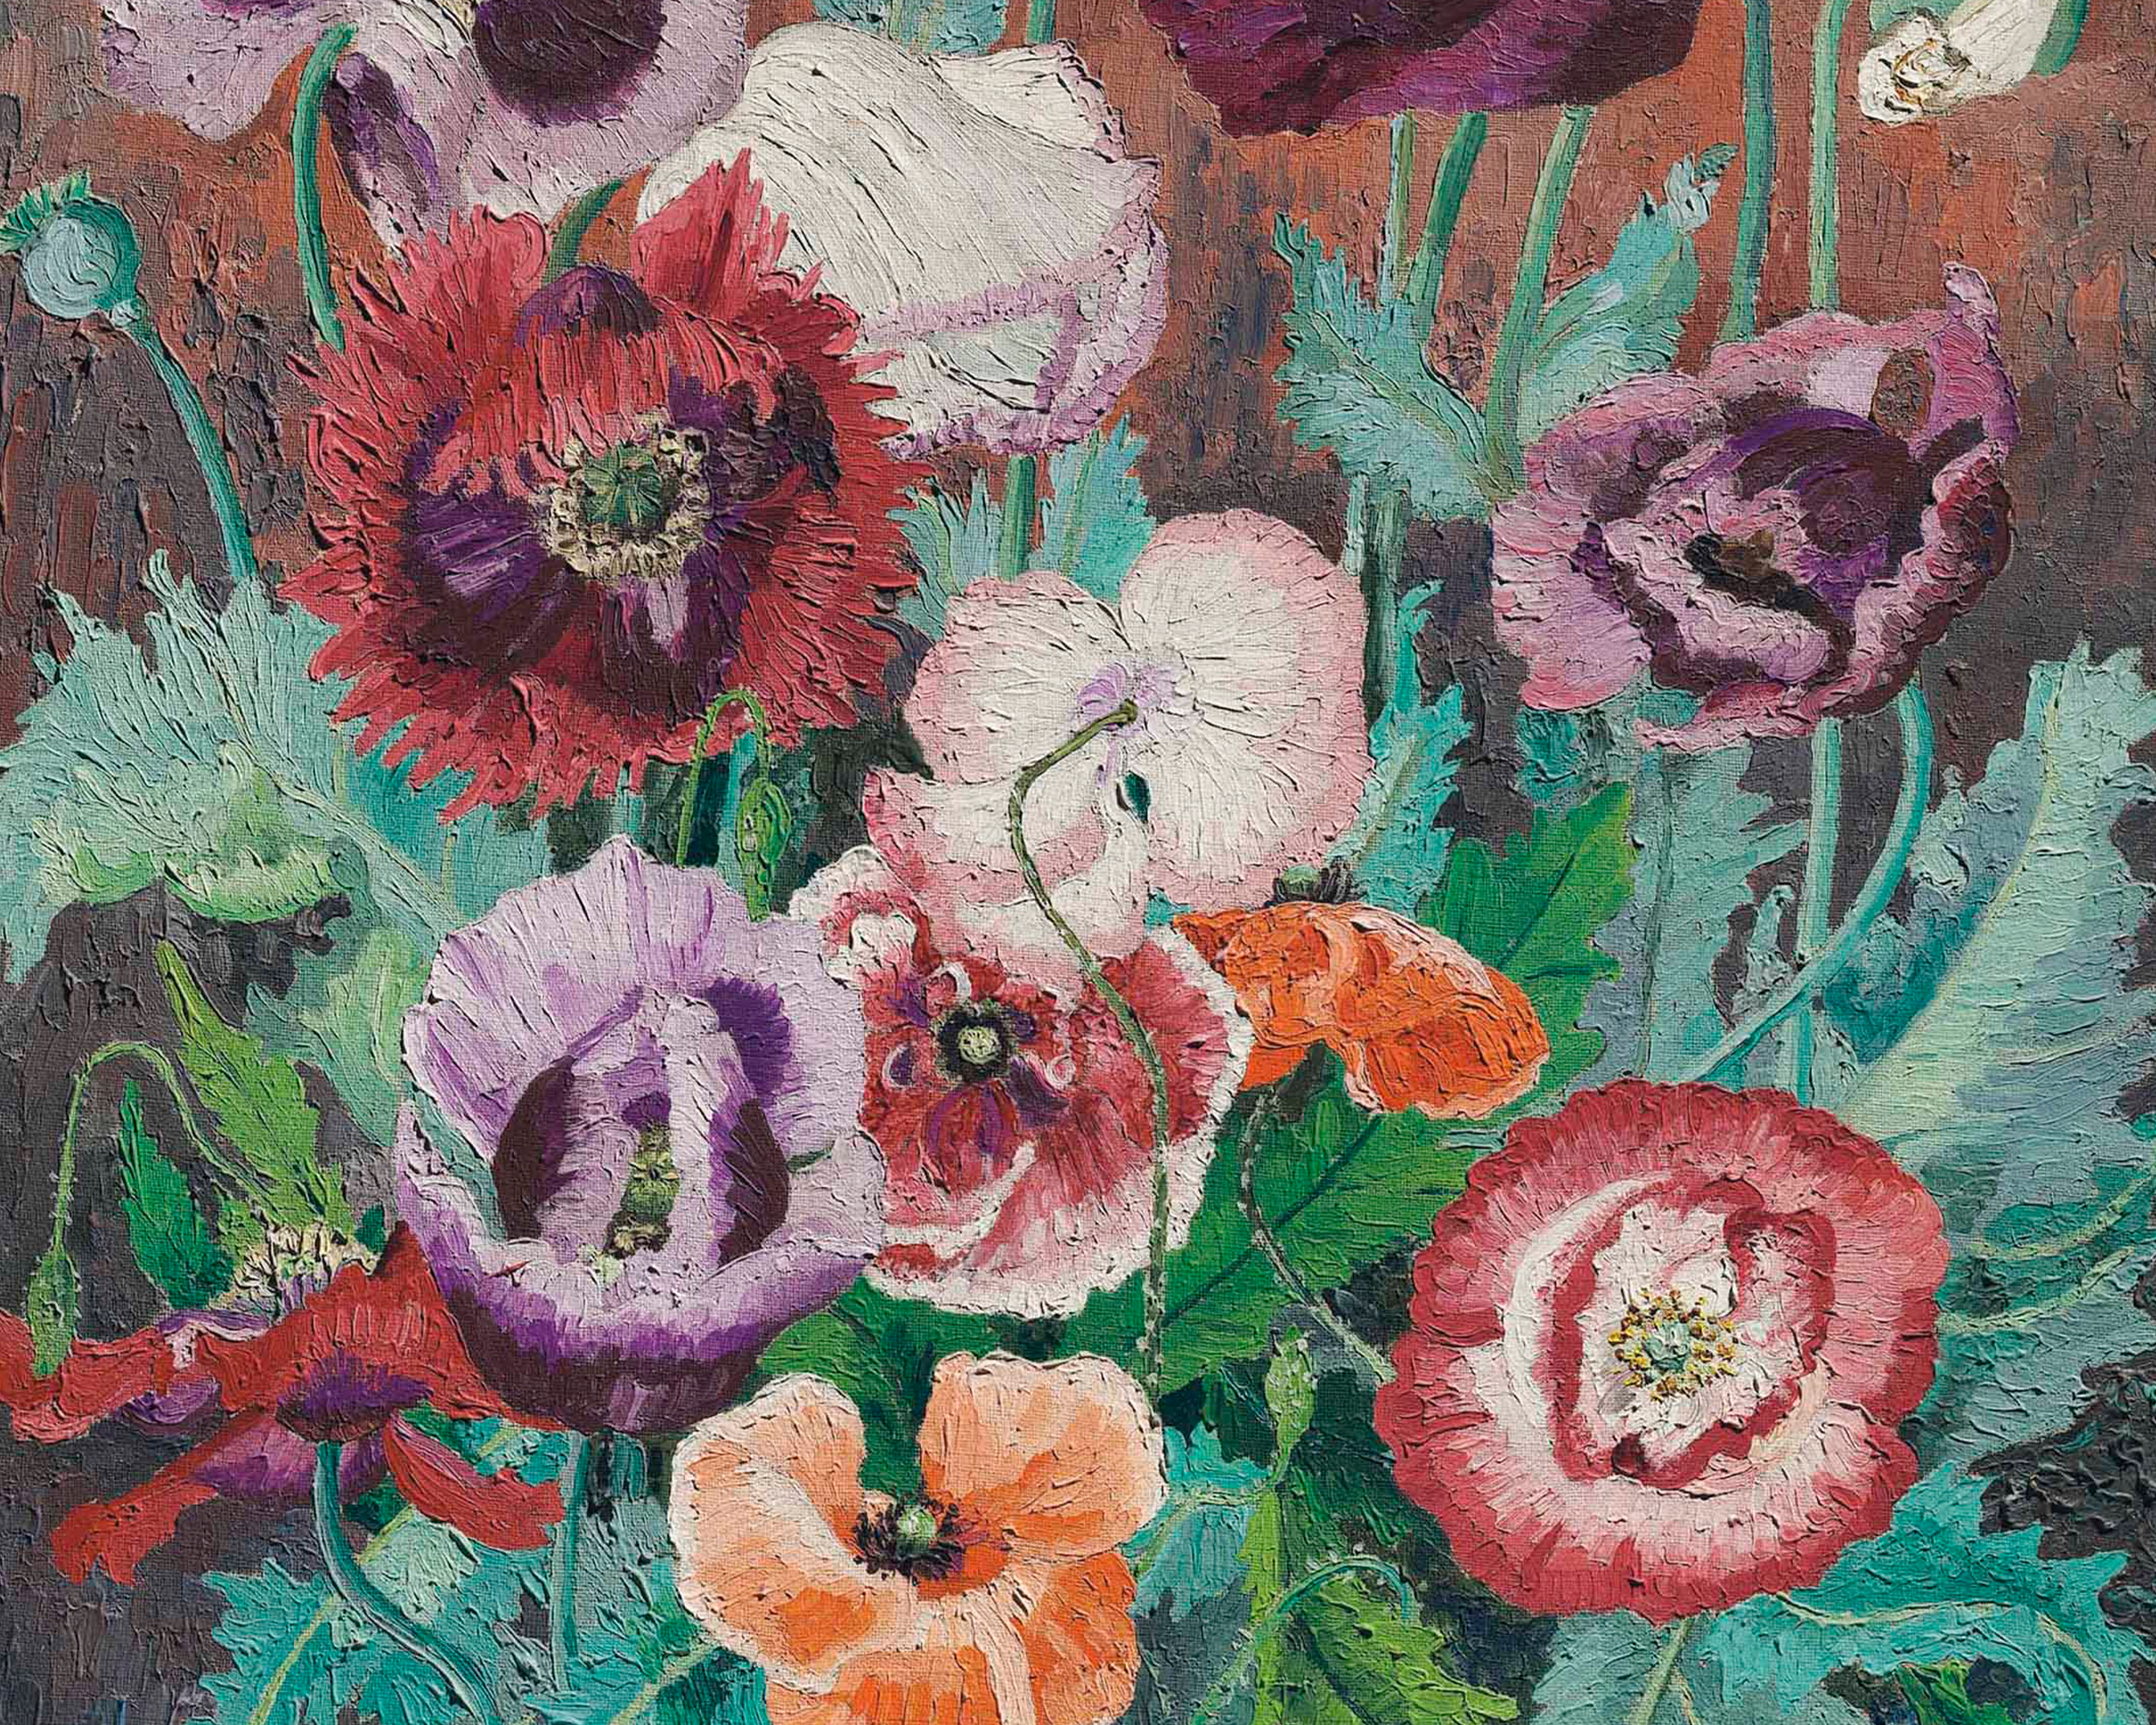 An image of the painting, Poppies by Cedric Morris.